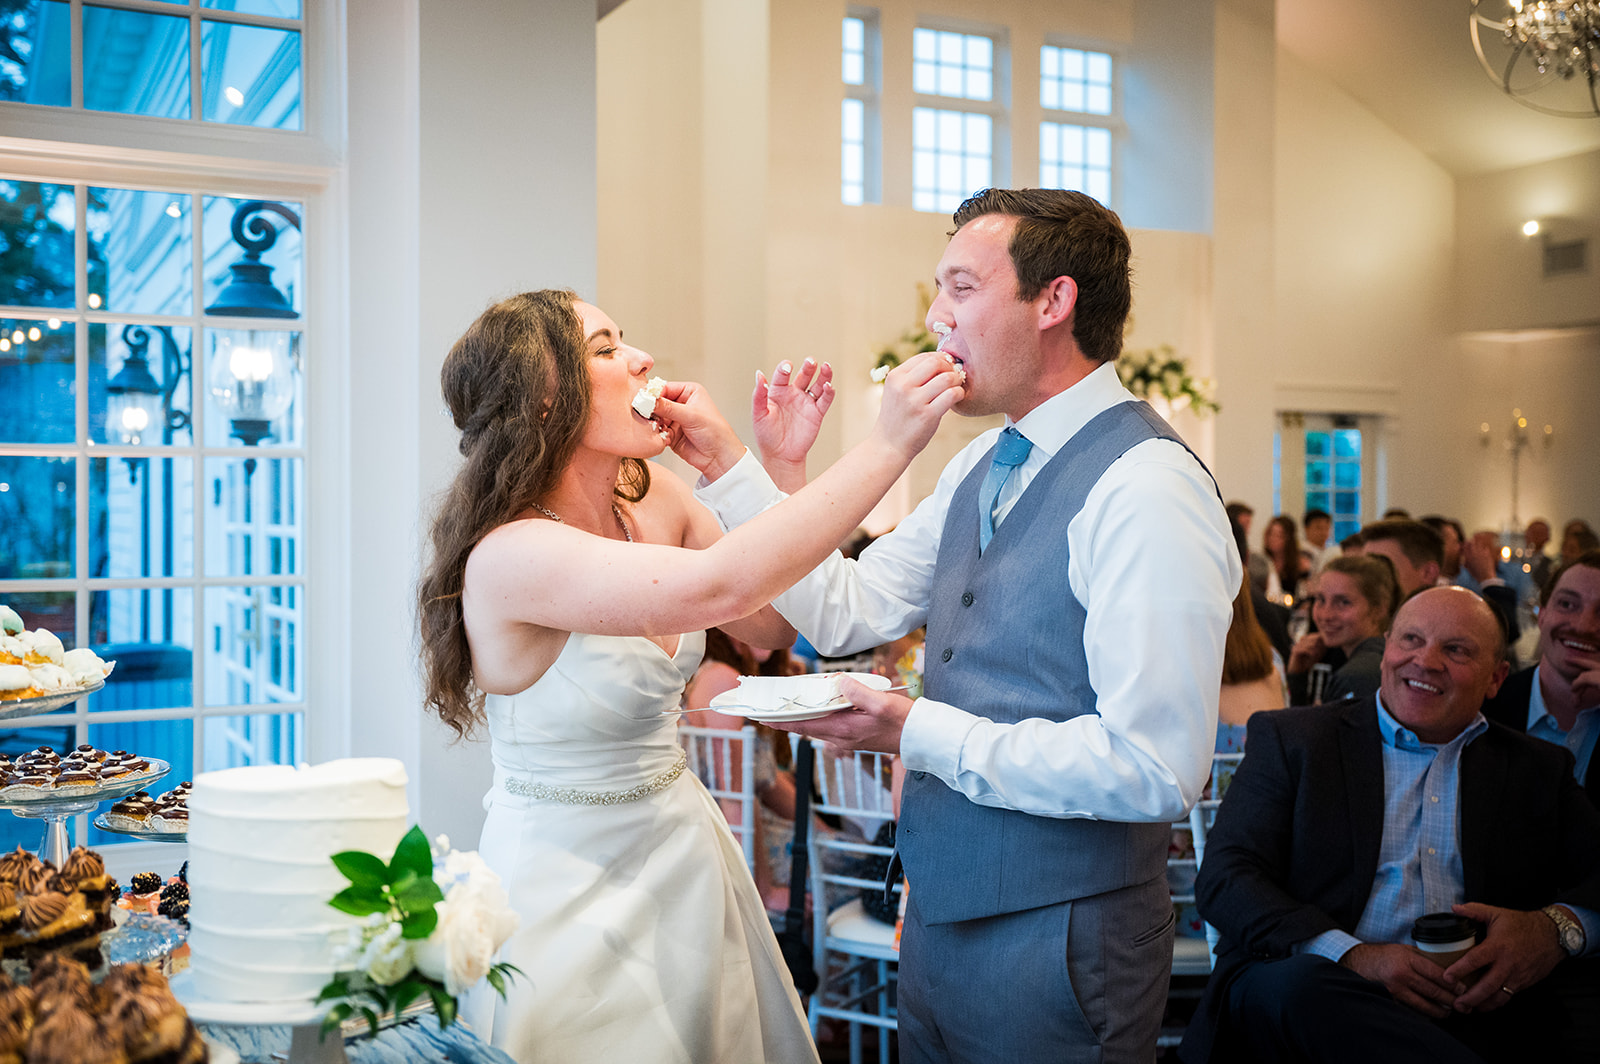 Bride and groom feed each other cake at their wedding.